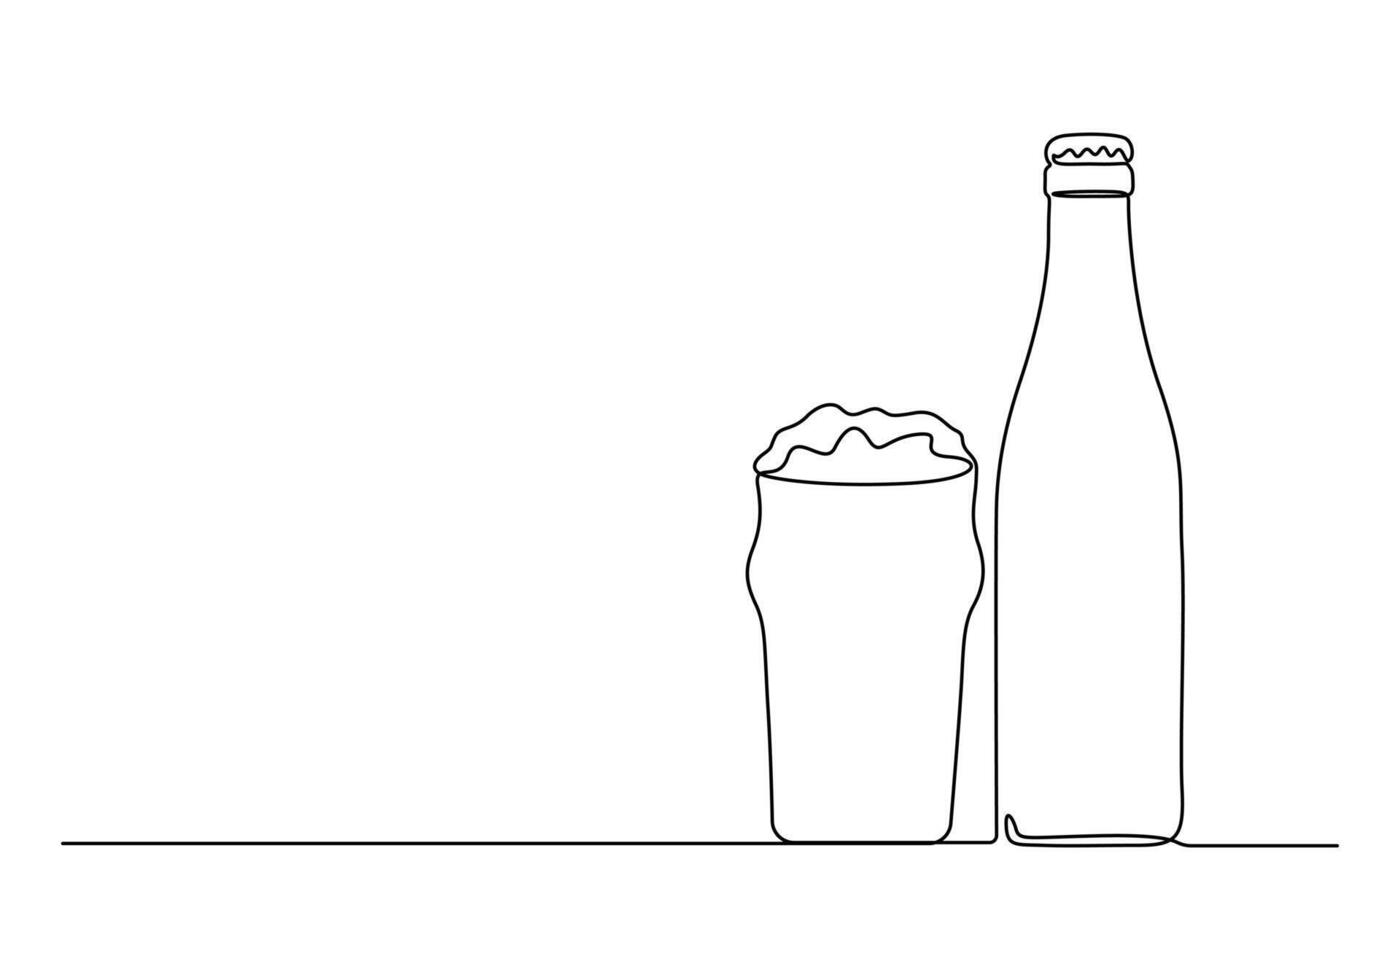 Beer glass and bottle continuous one line drawing vector illustration. Pro vector